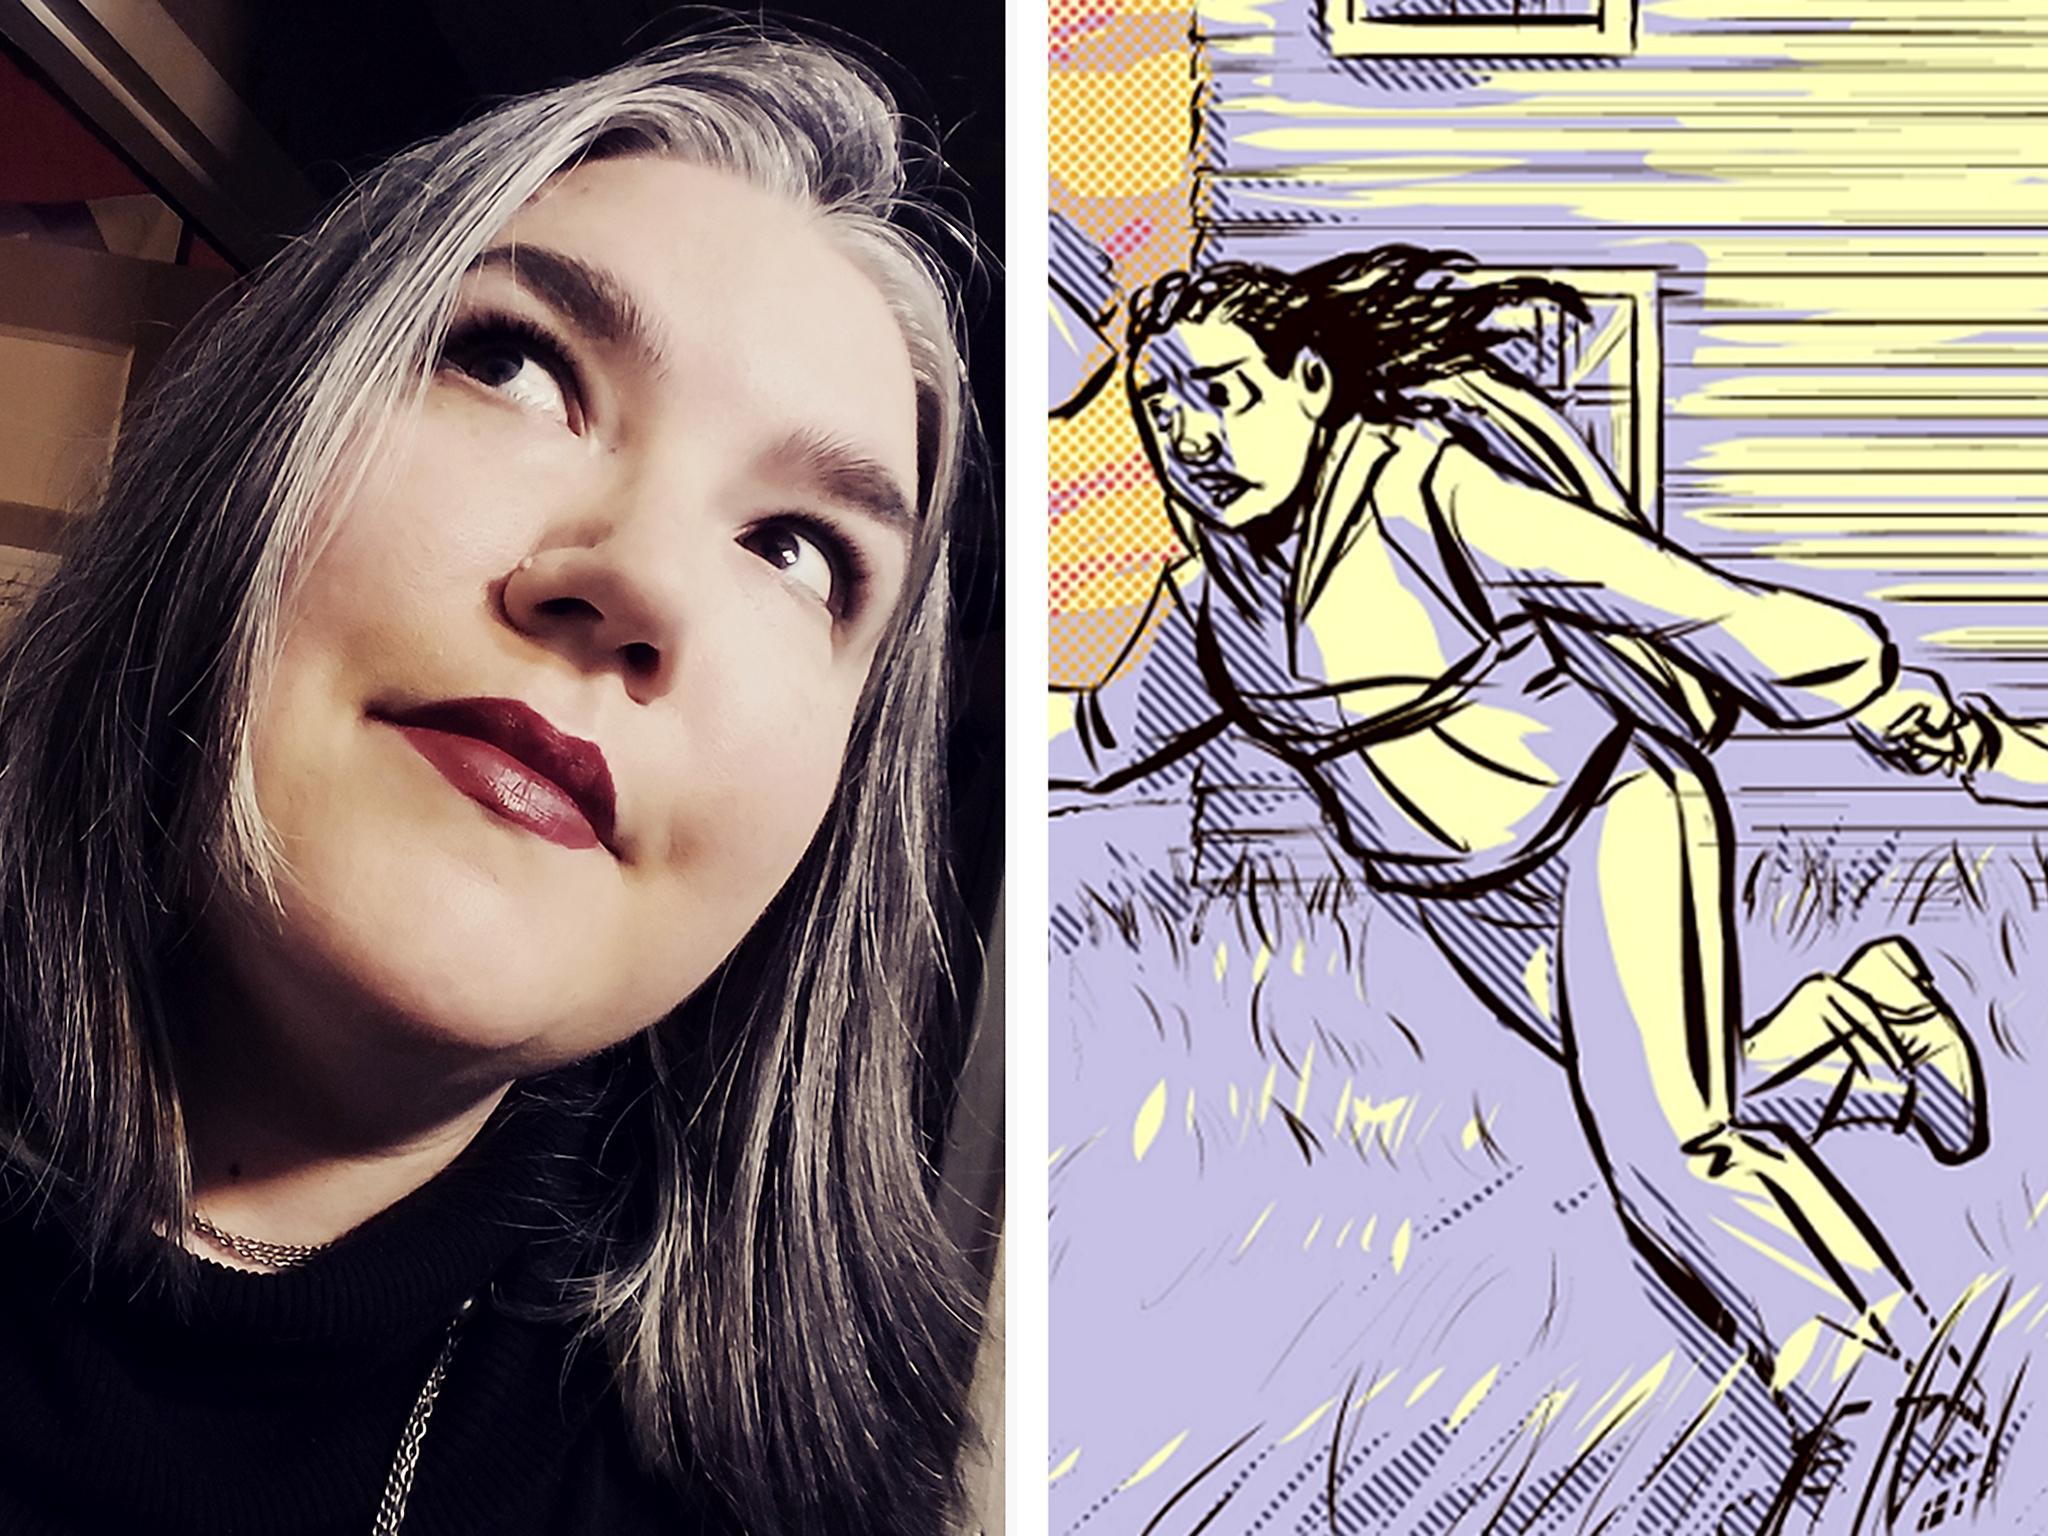 Comic book artist Rori! embarked on a project last year drawing 100 heroic women in 100 days